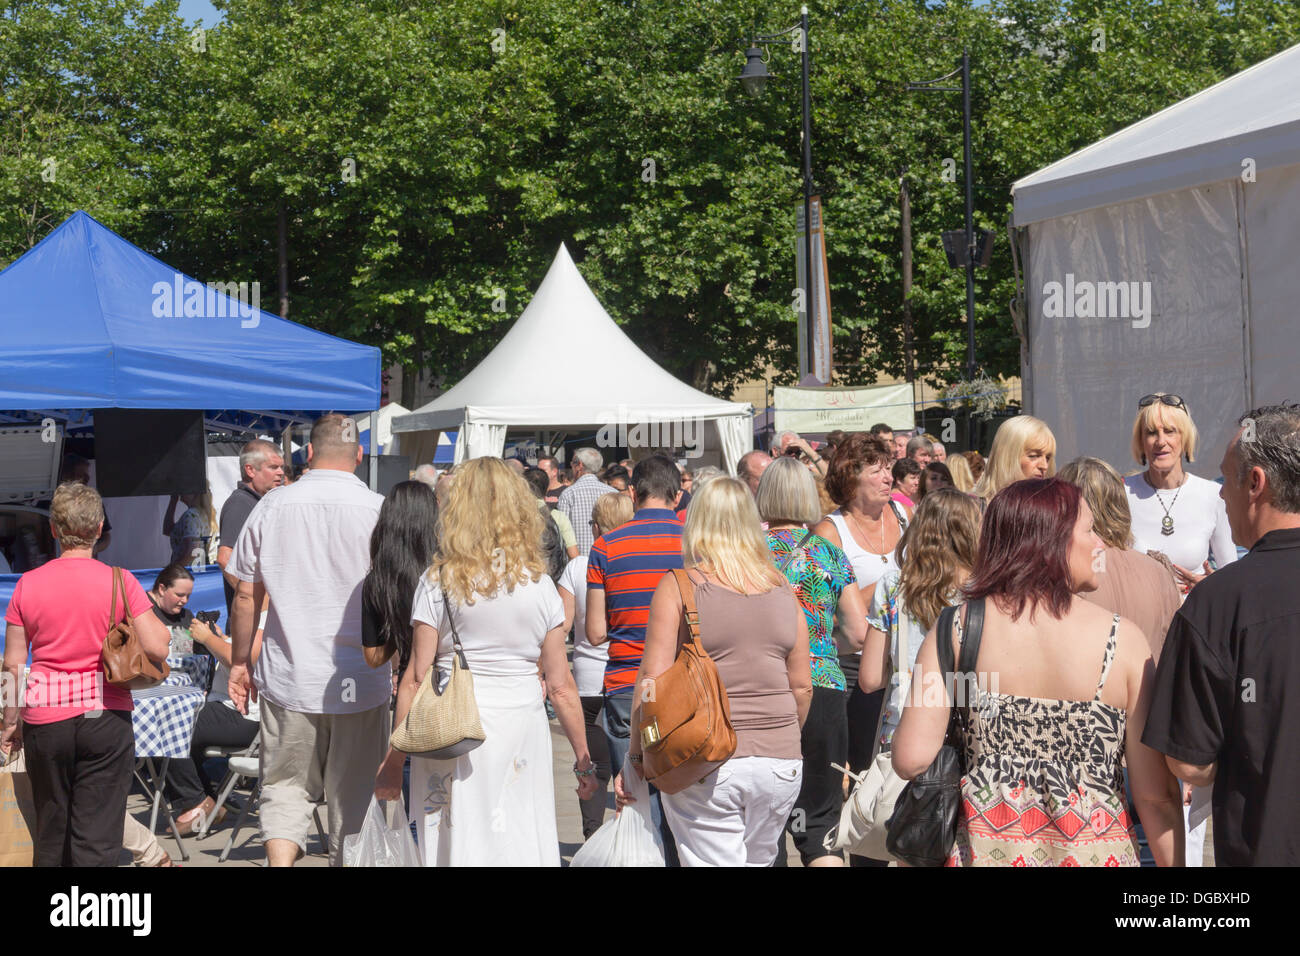 Crowds of visitors in Victoria Square, Bolton during the August Bank Holiday 2013 Bolton Food festival. Stock Photo